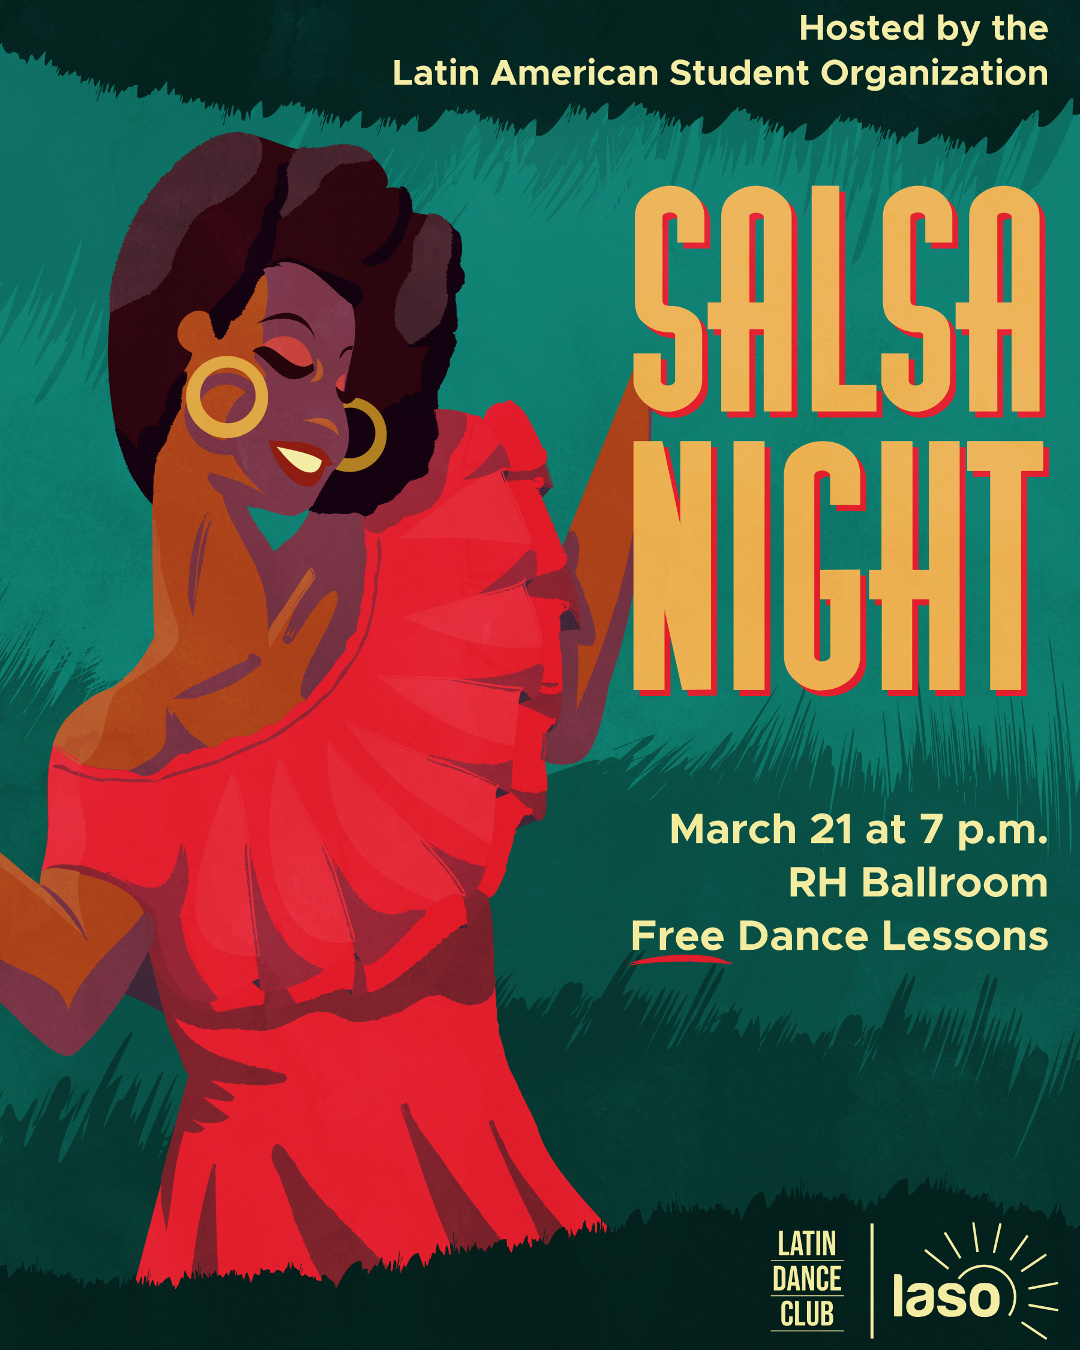 Poster of a dancing woman in a red dress against a green background promoting an event called Salsa Night